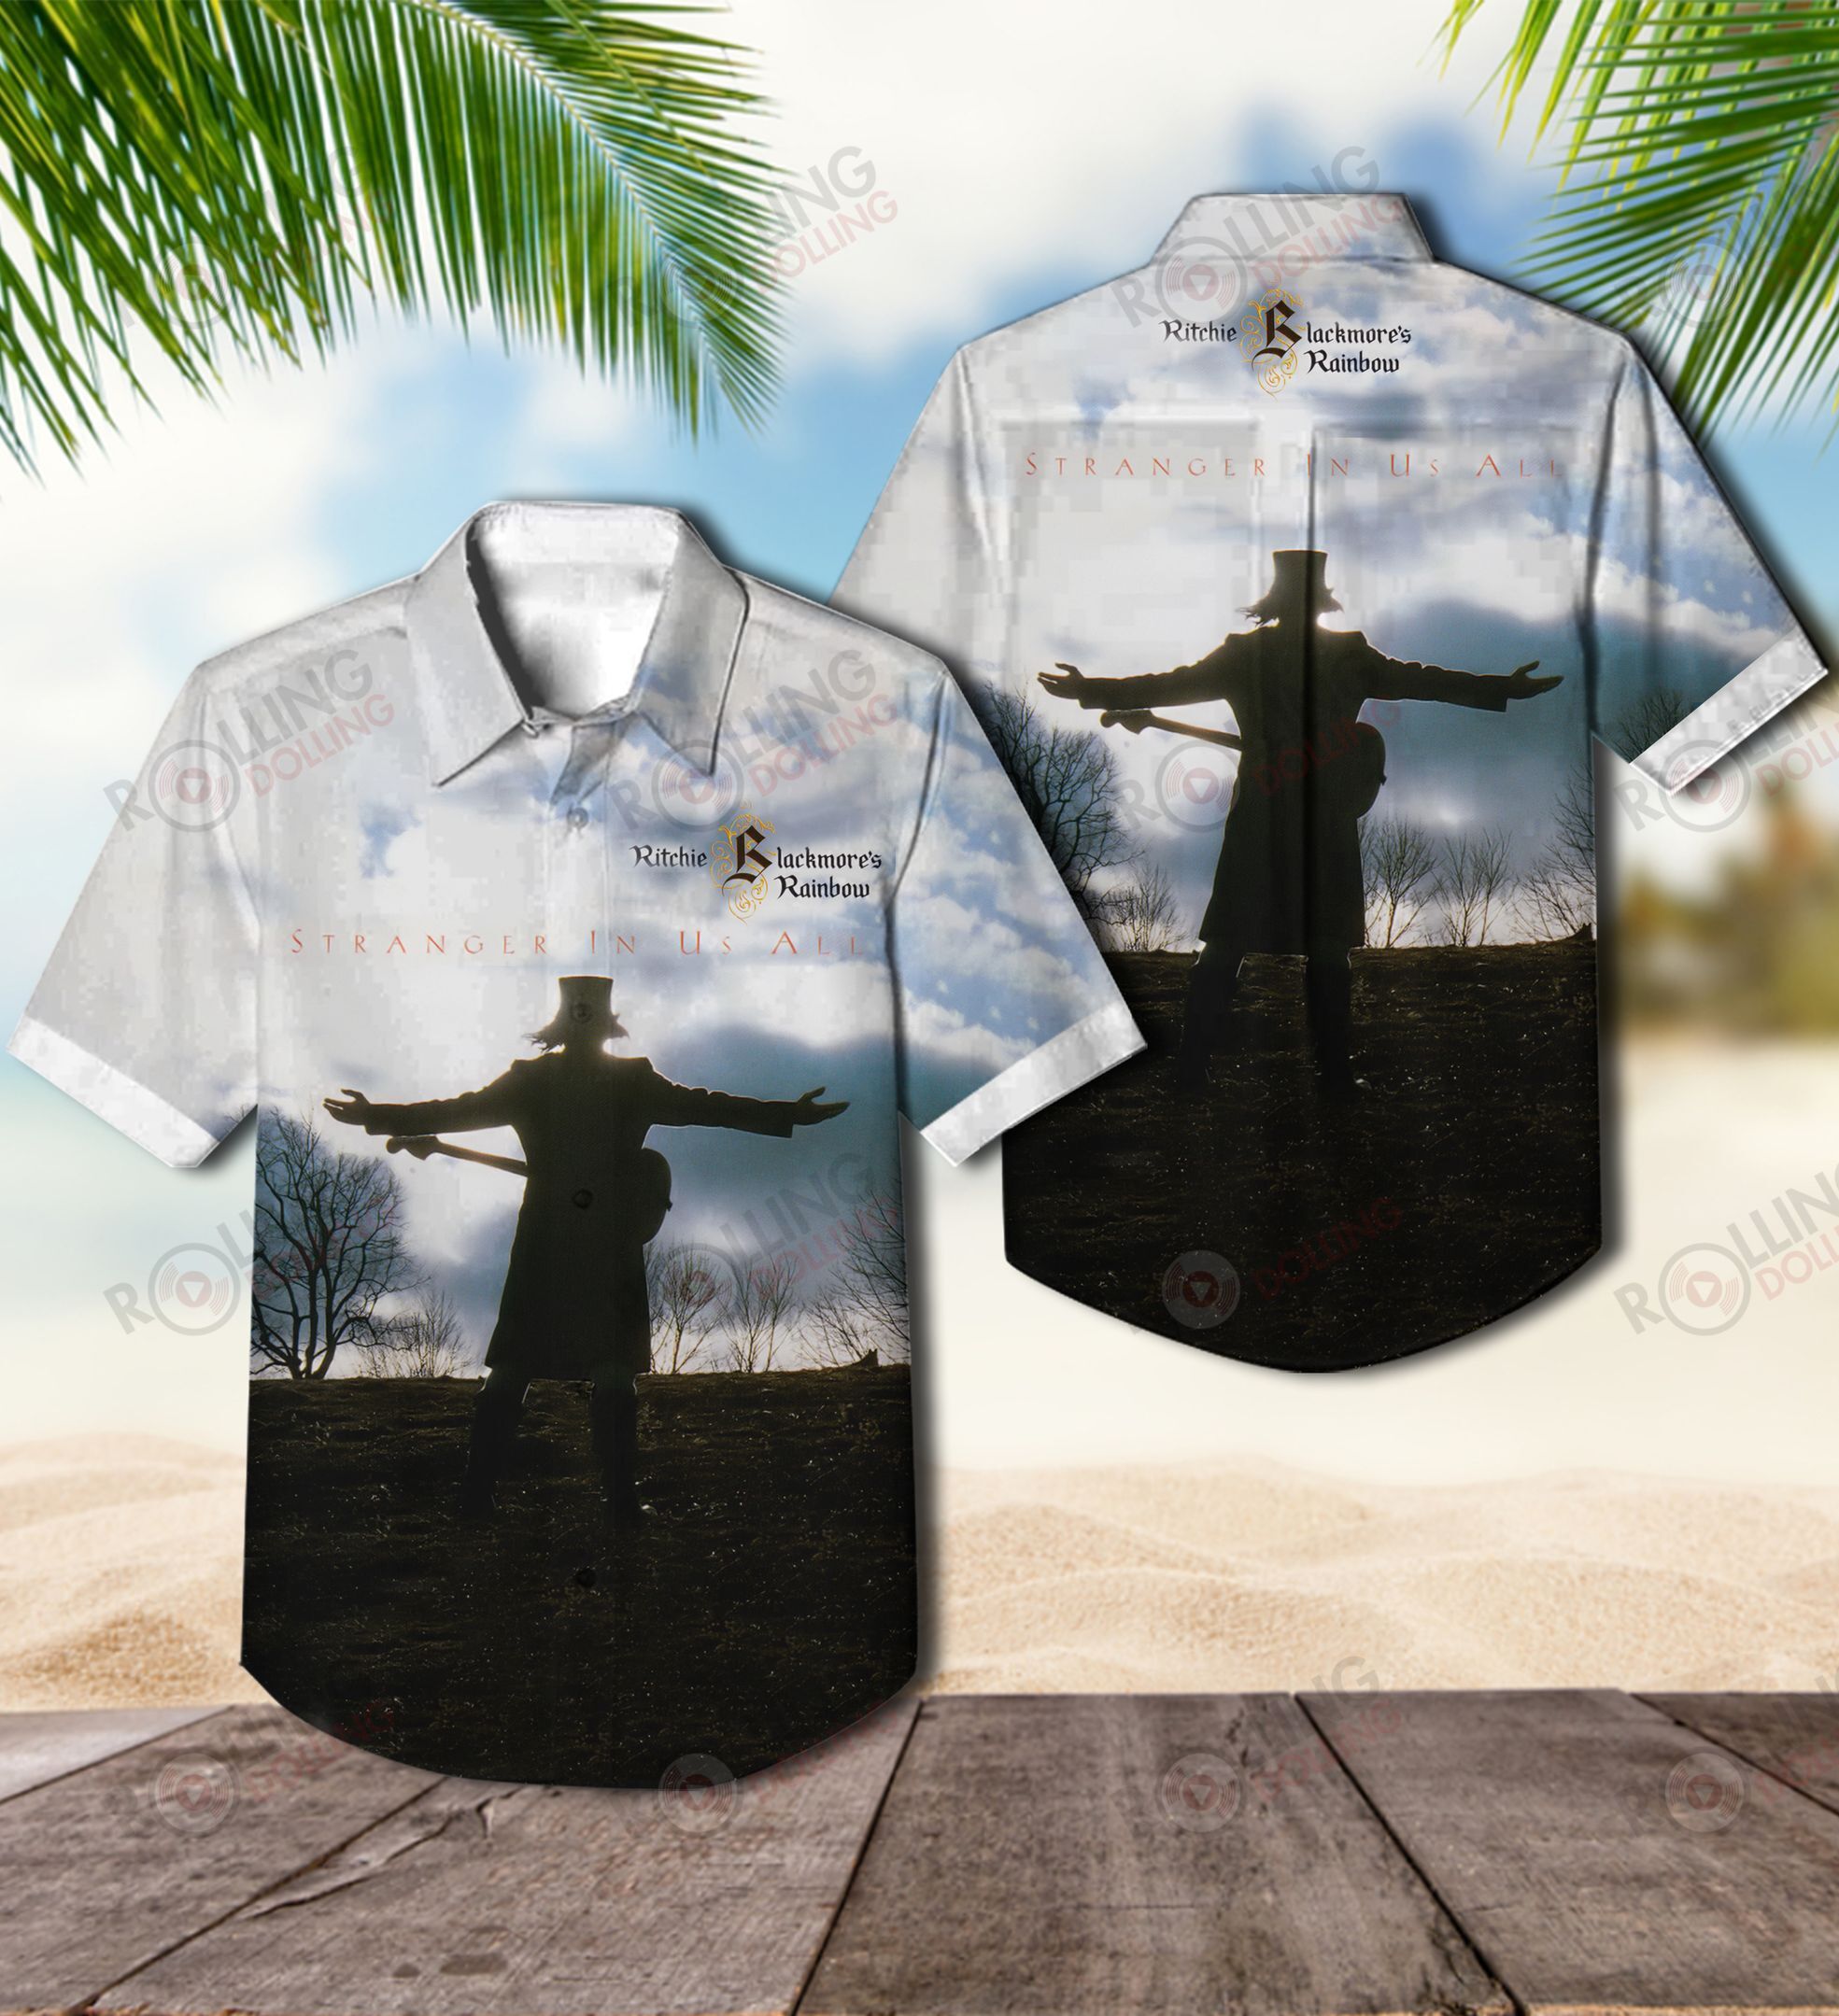 For summer, consider wearing This Amazing Hawaiian Shirt shirt in our store 126